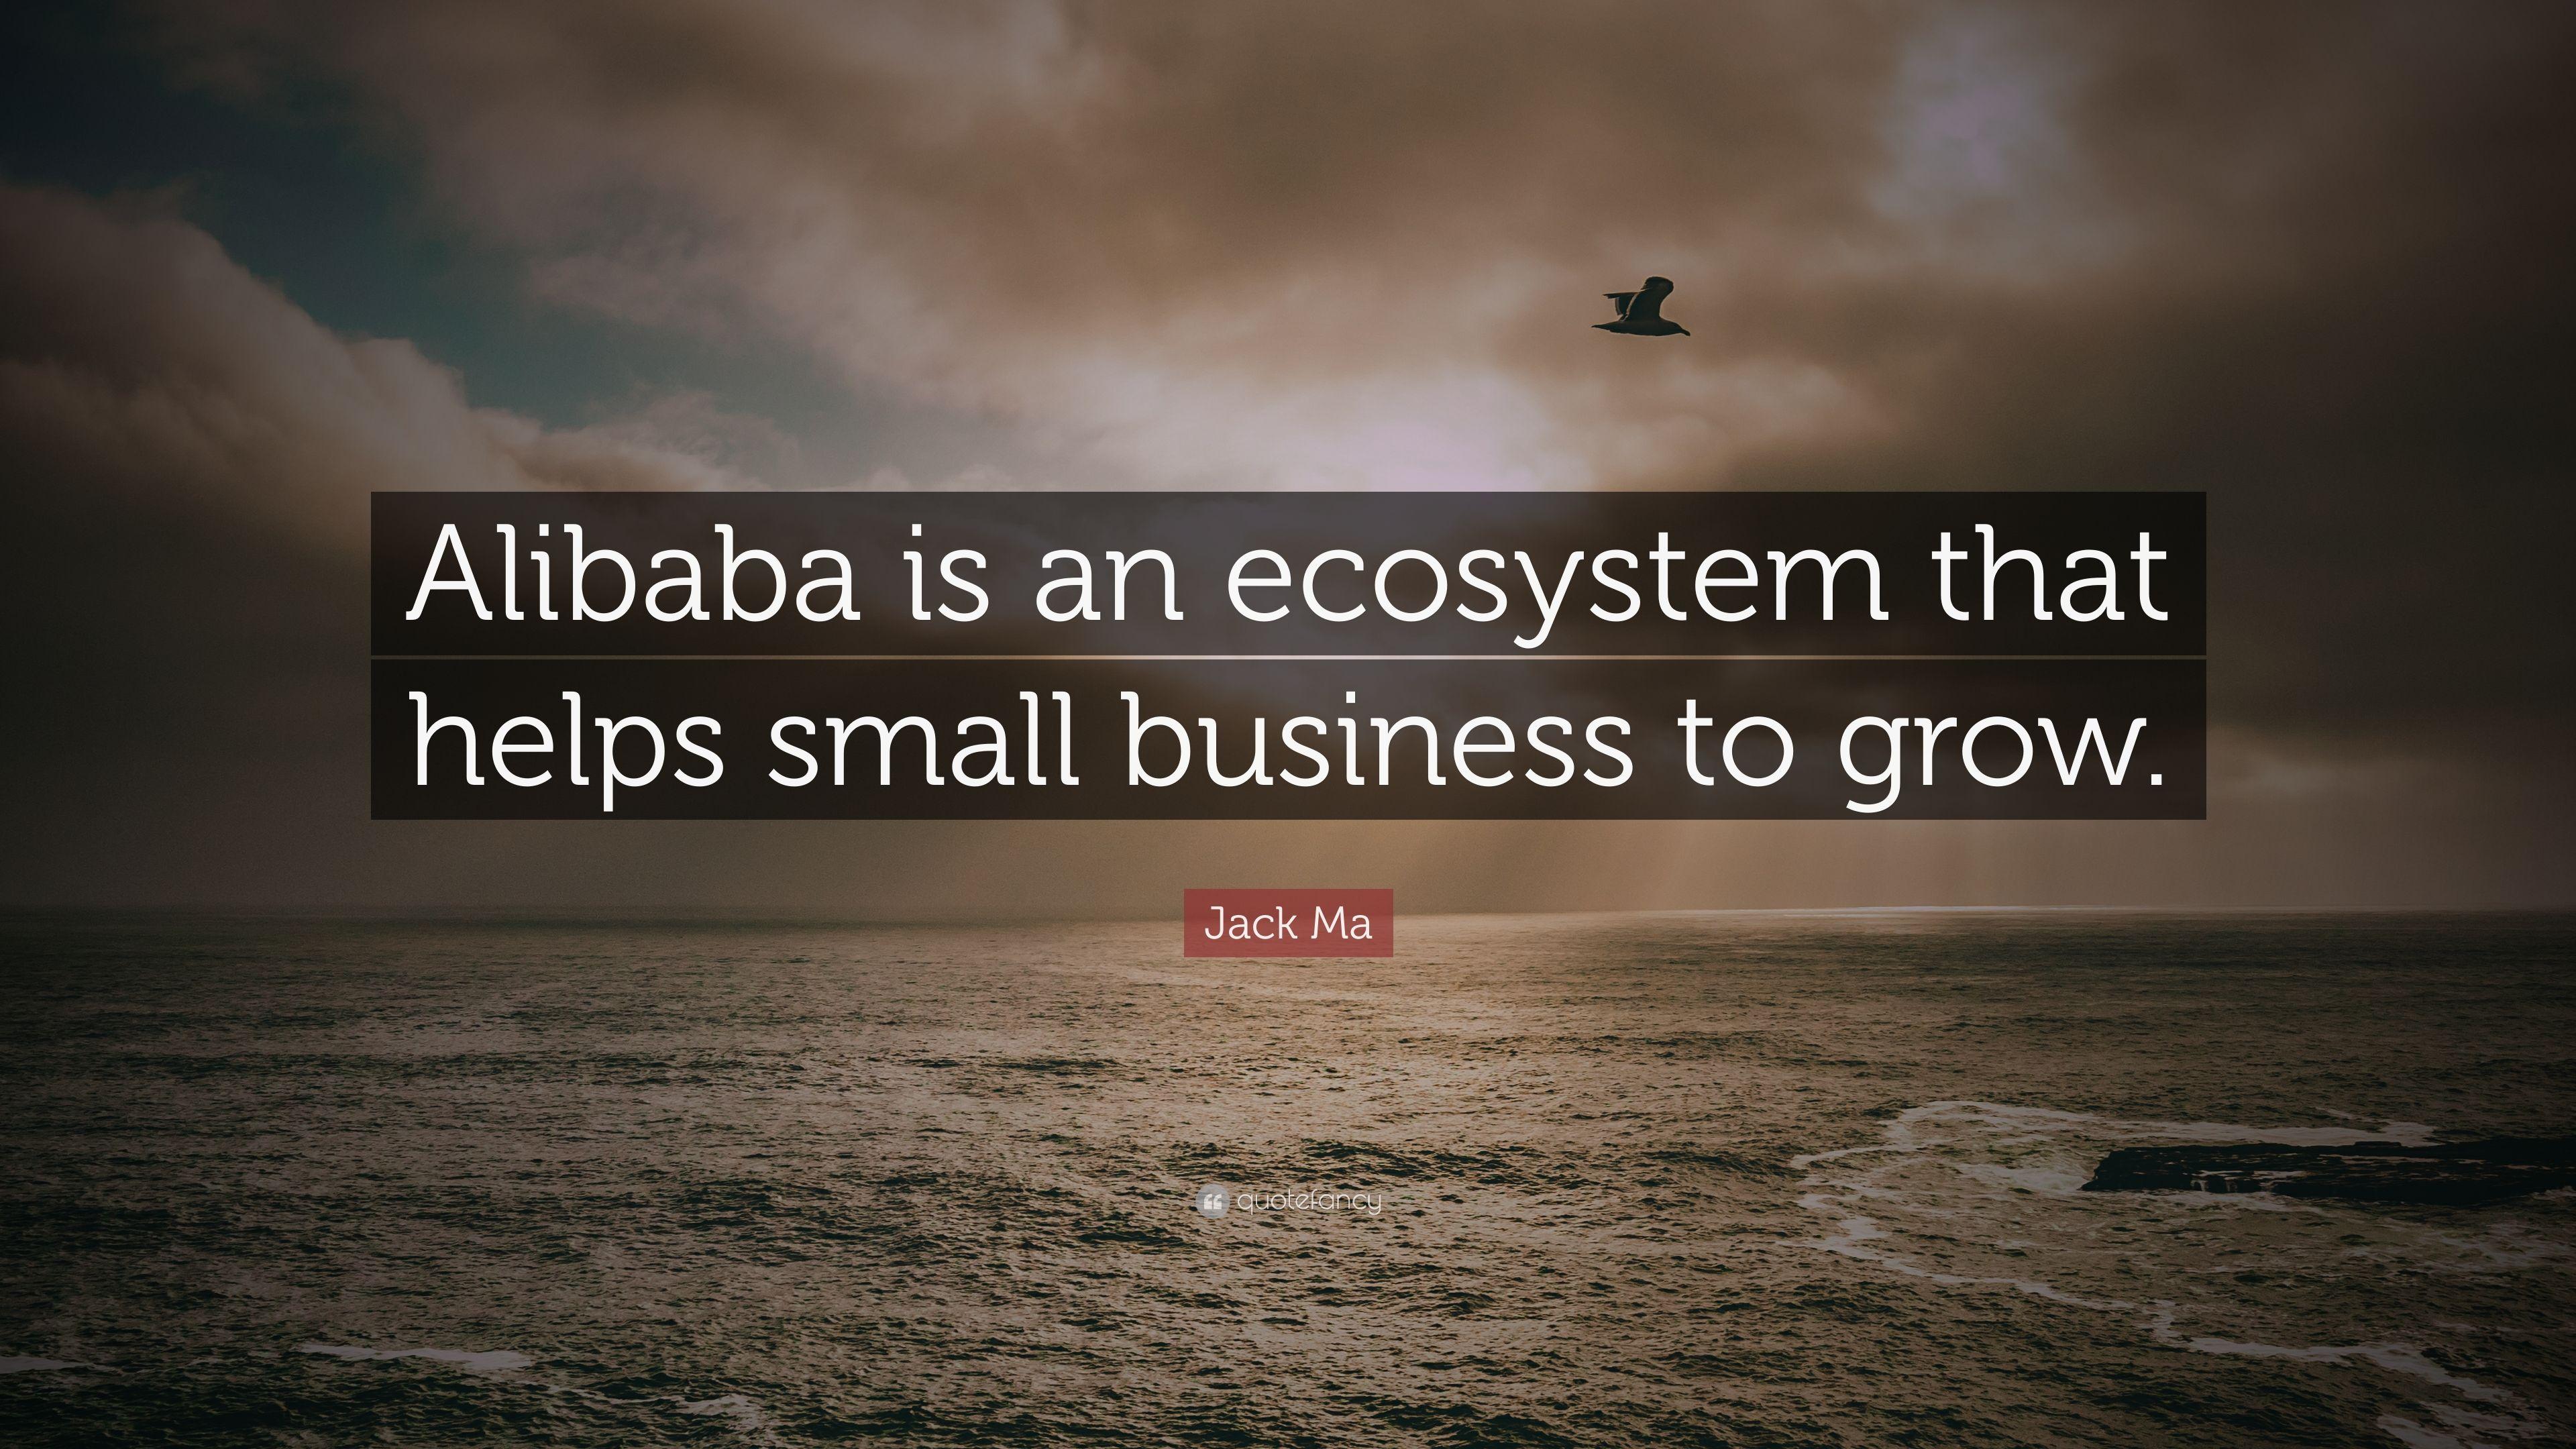 Jack Ma Quote: “Alibaba is an ecosystem that helps small business